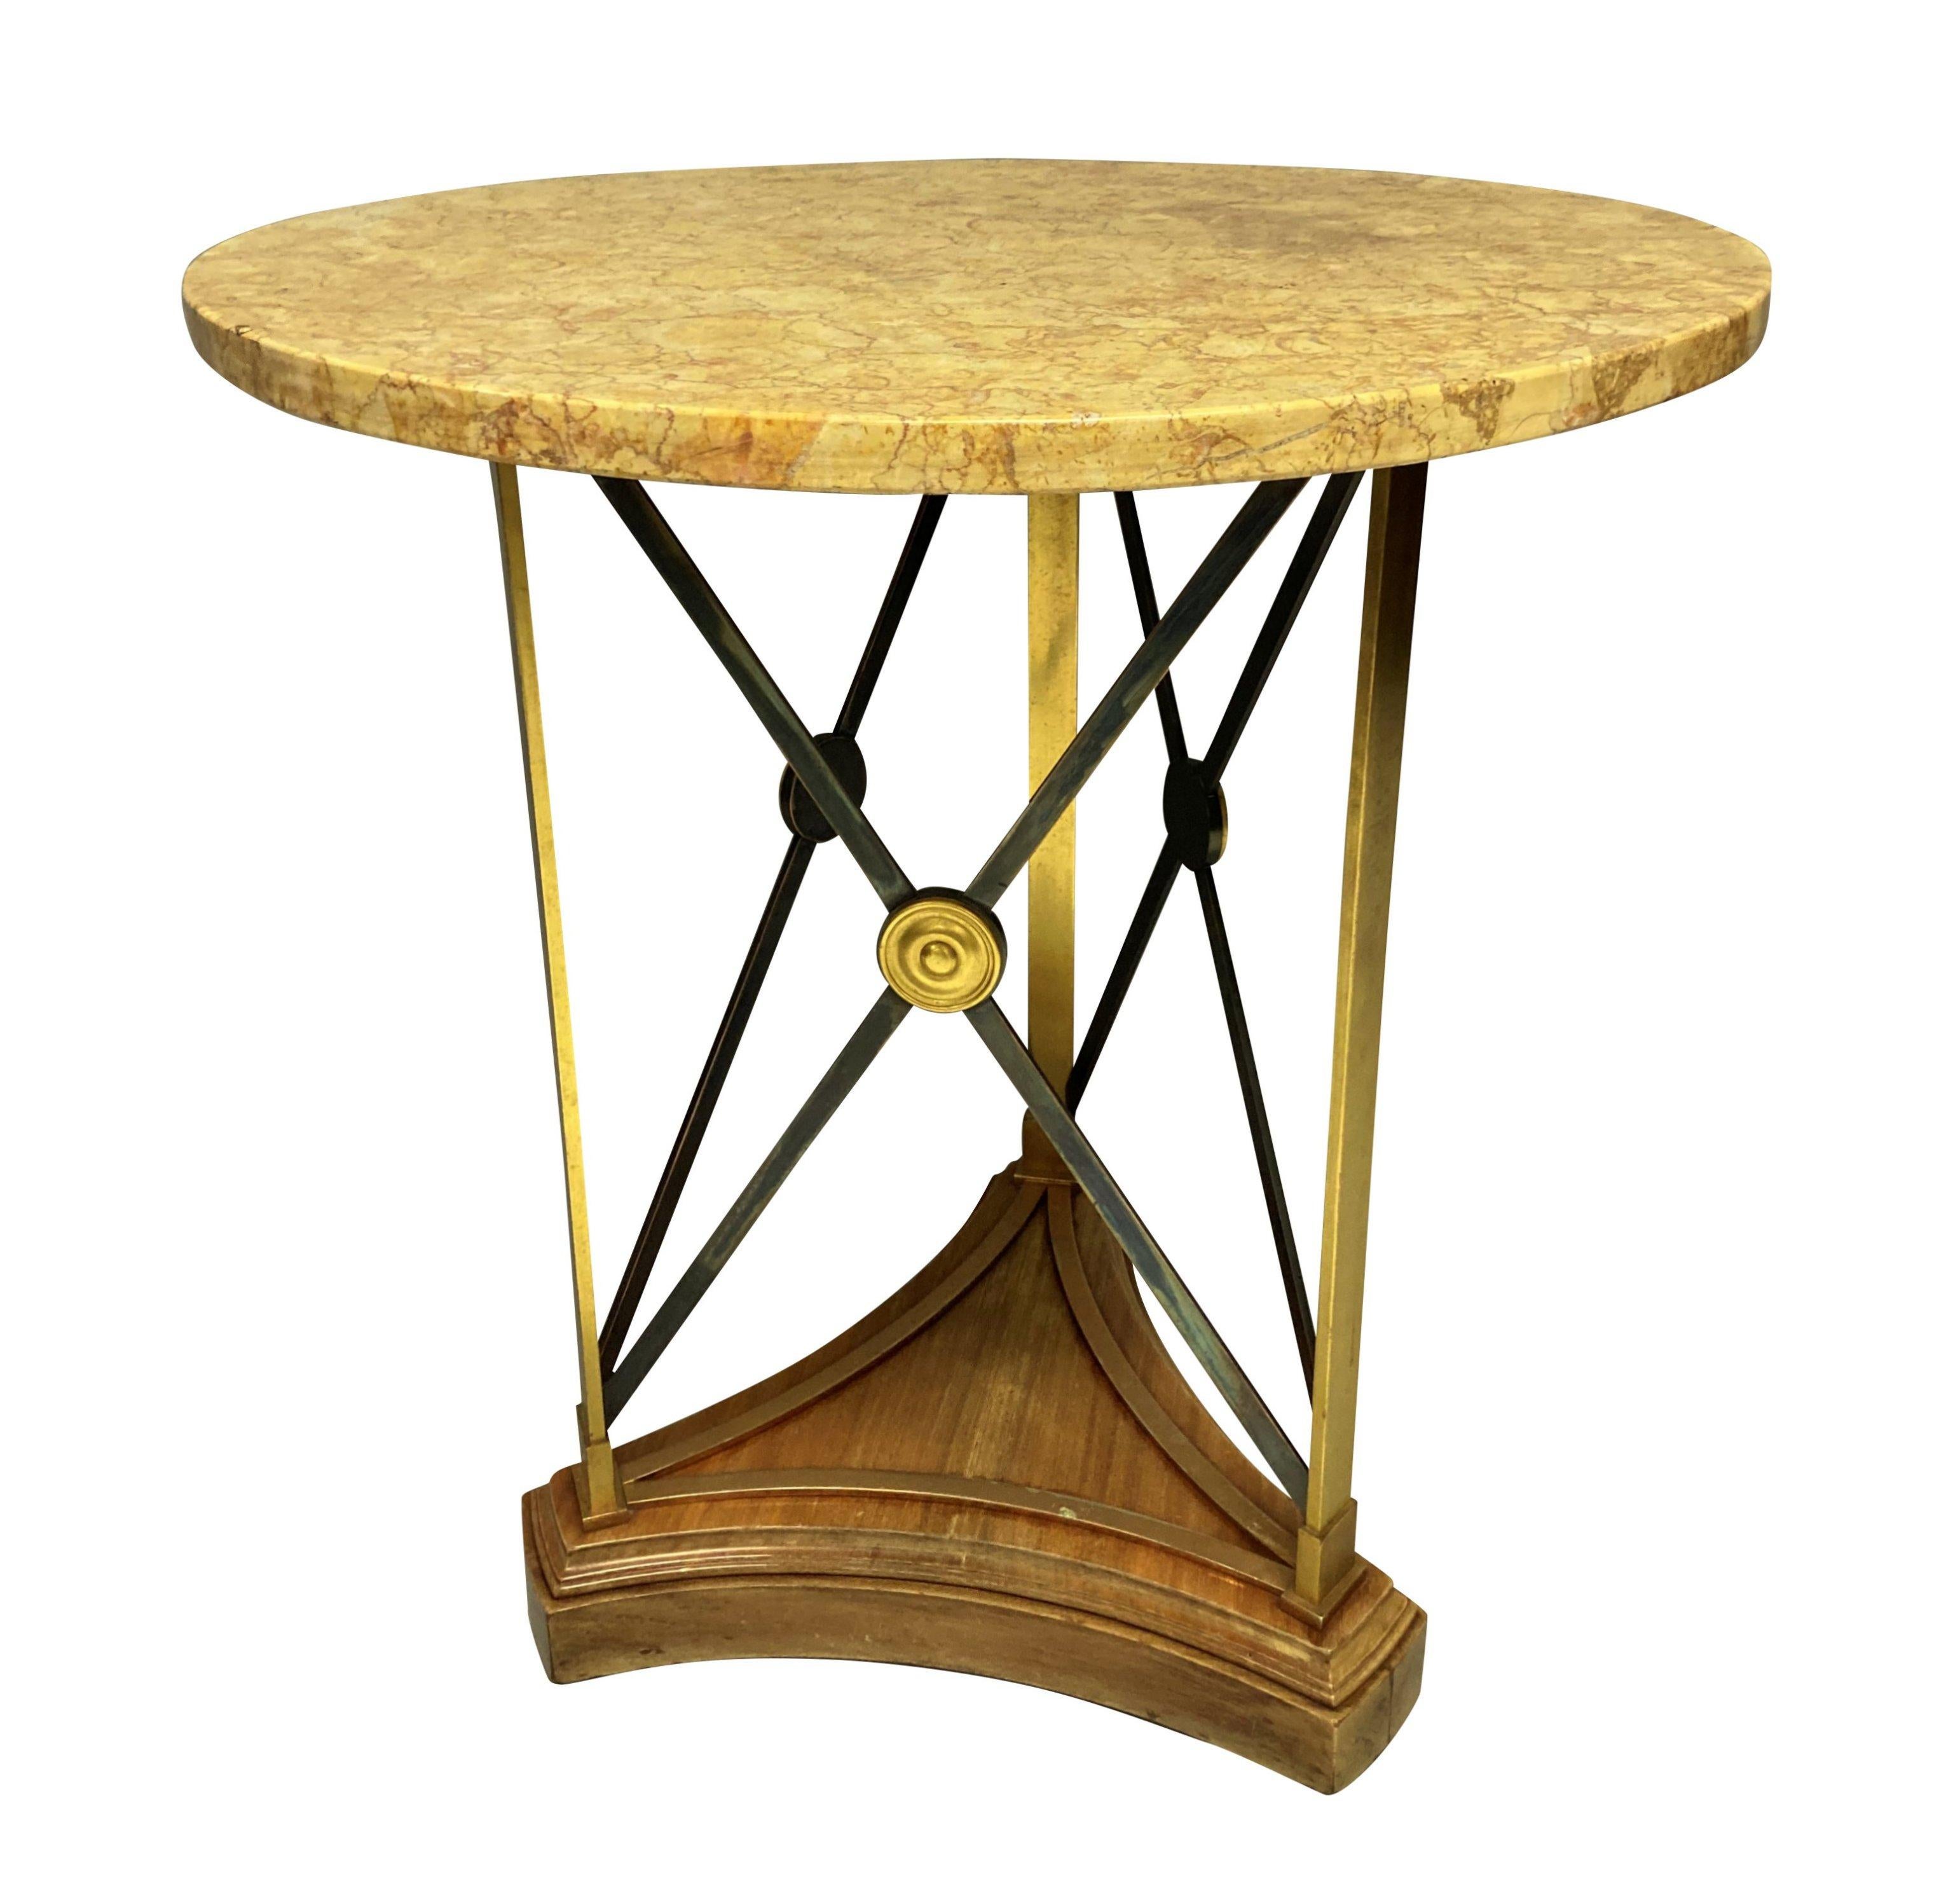 A French mid-century gueridon table, on a pale mahogany base, with brass and steel neo-classical design and a sienna marble top. Very heavy and sturdy.